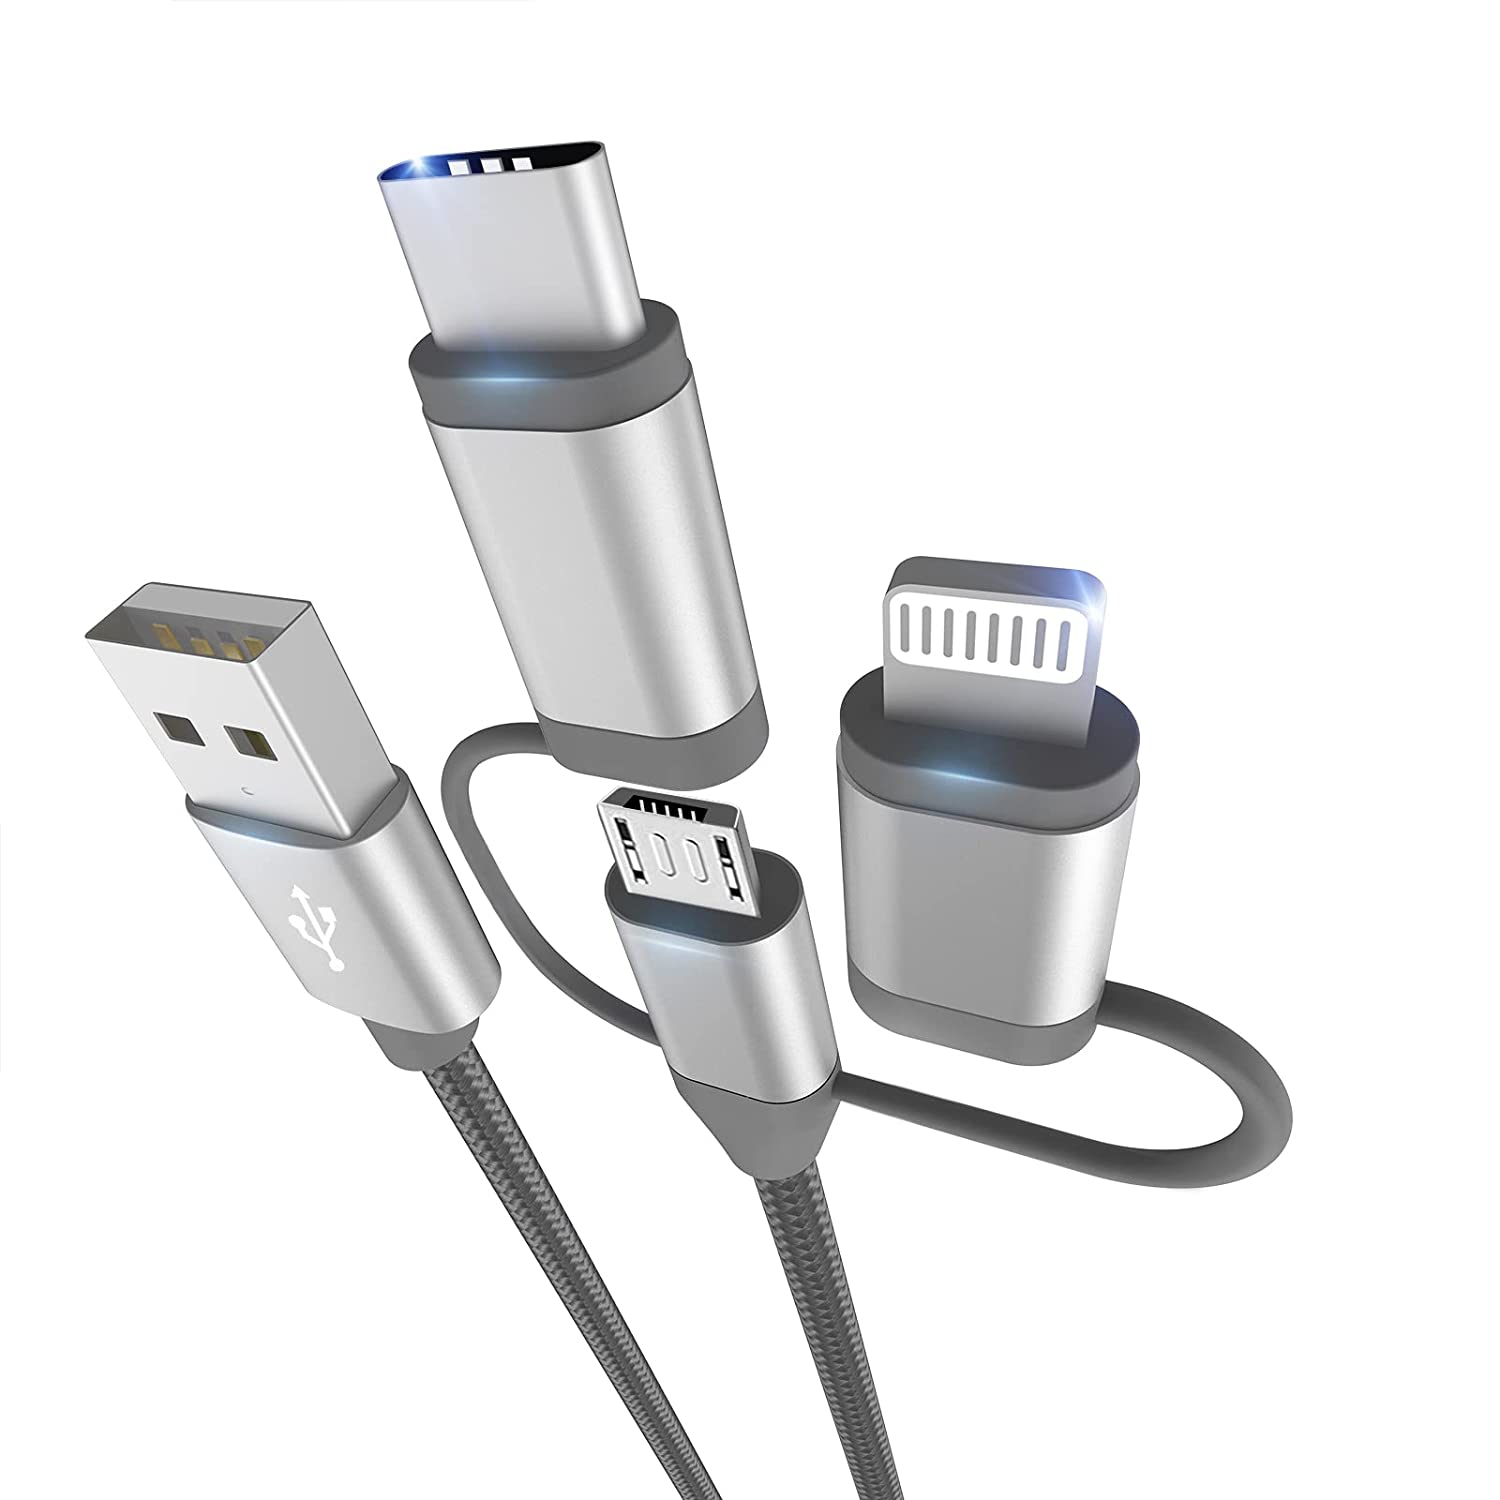 Best 3-in-1 Charging Cables for iPhone - iOS Hacker